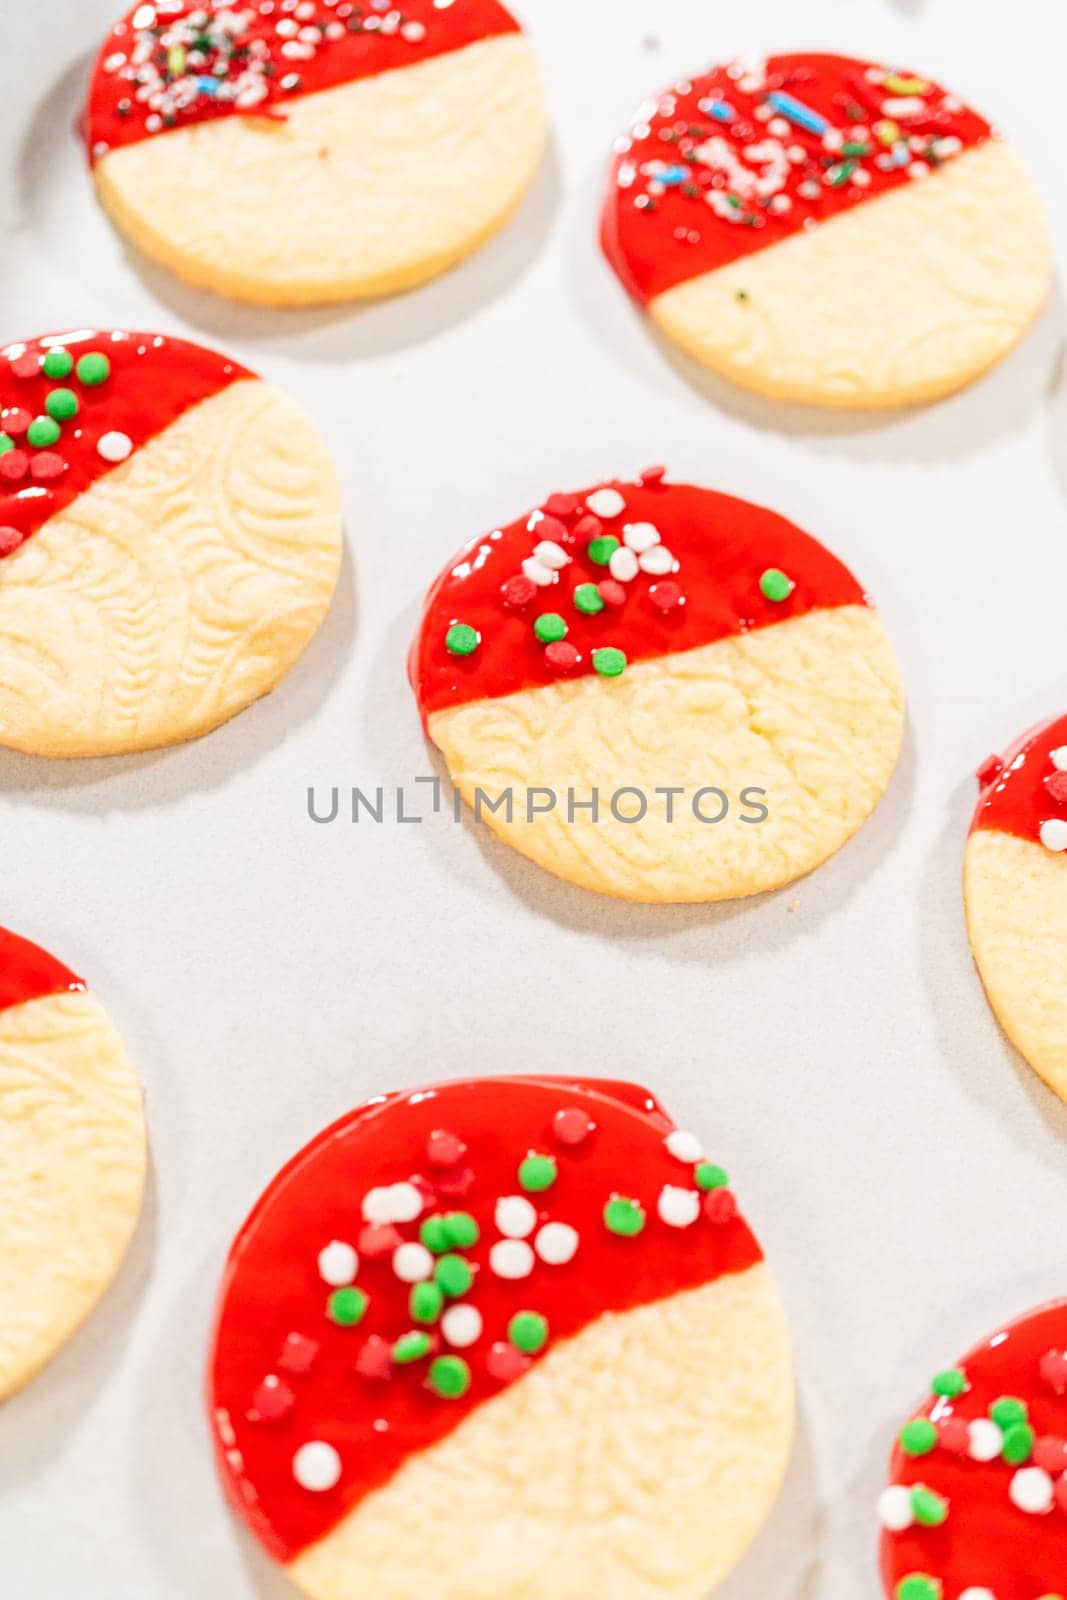 Skillfully decorating cookies with vibrant red melted chocolate and a generous sprinkle of vibrant green, creating a festive holiday treat.